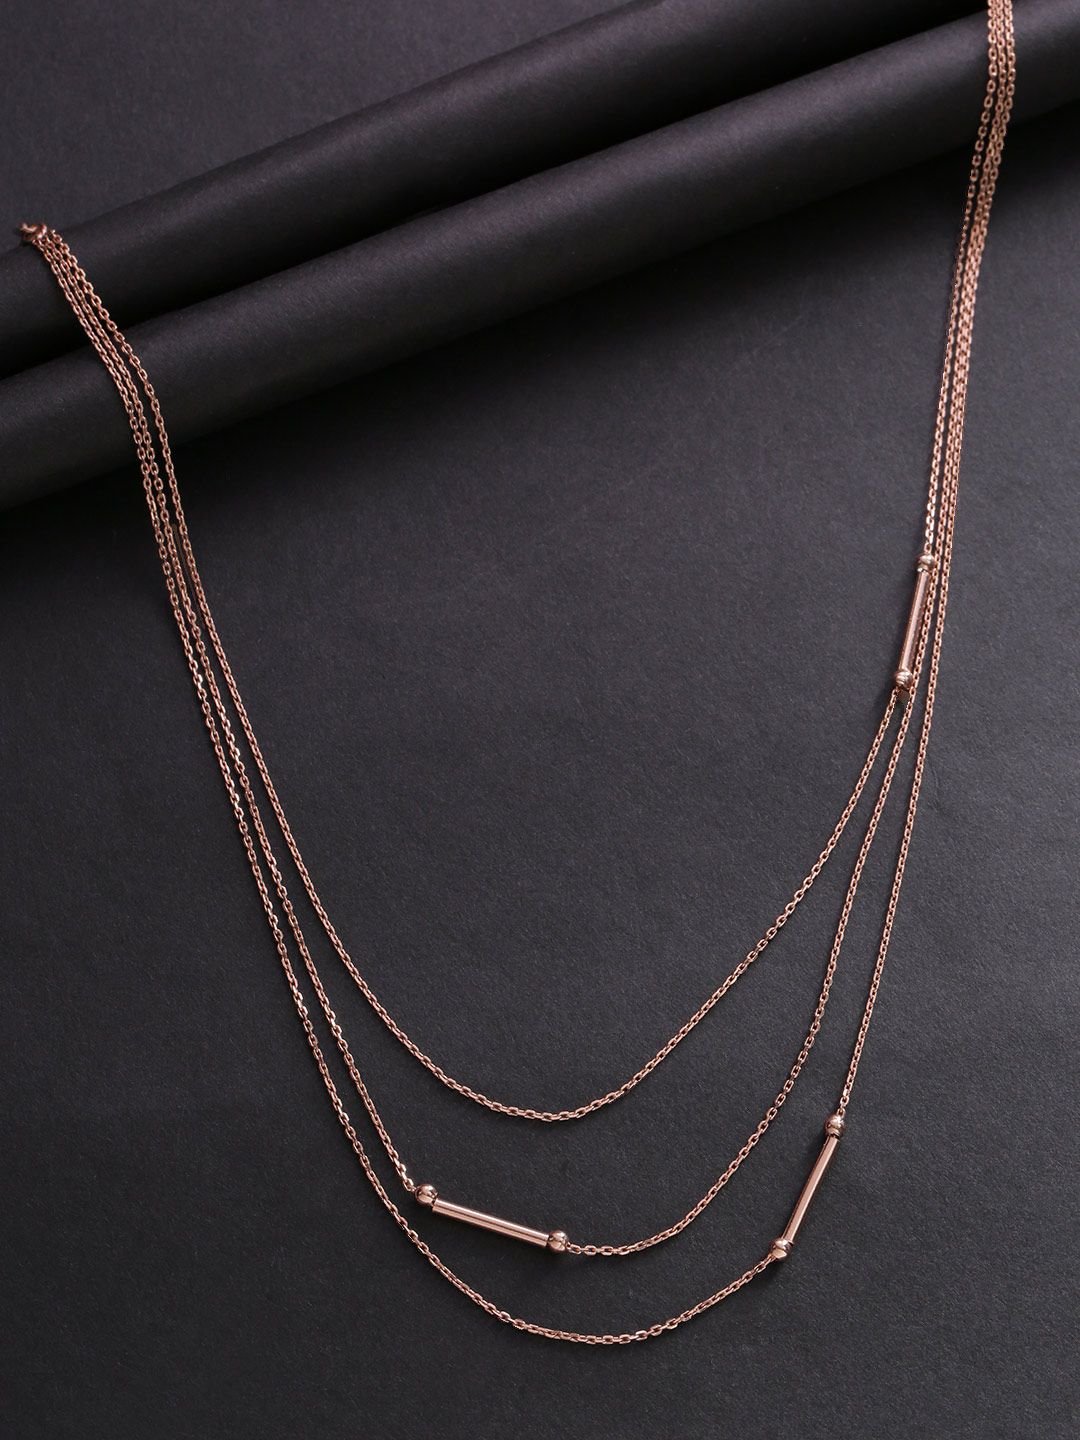 Carlton London Rose Gold-Plated Layered Necklace Price in India